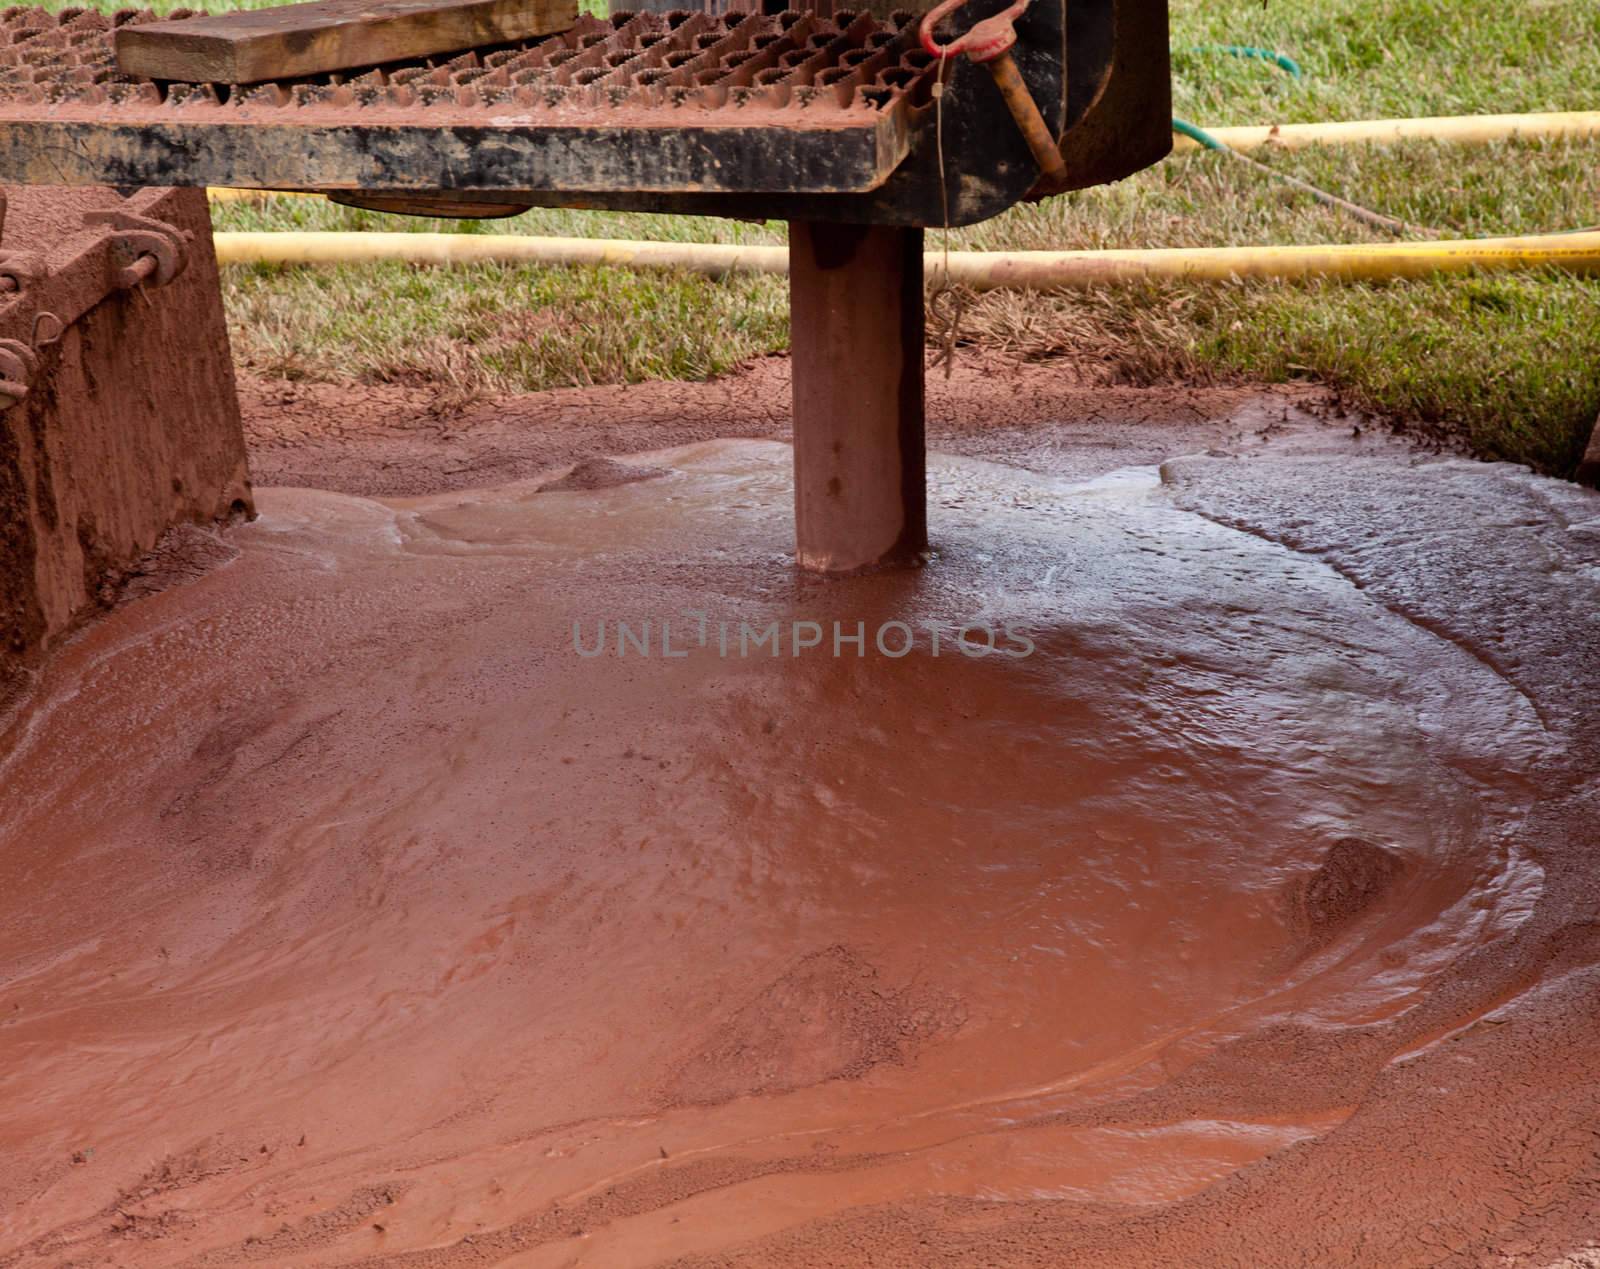 Slurry of mud from drilling for geothermal power system in suburban yard